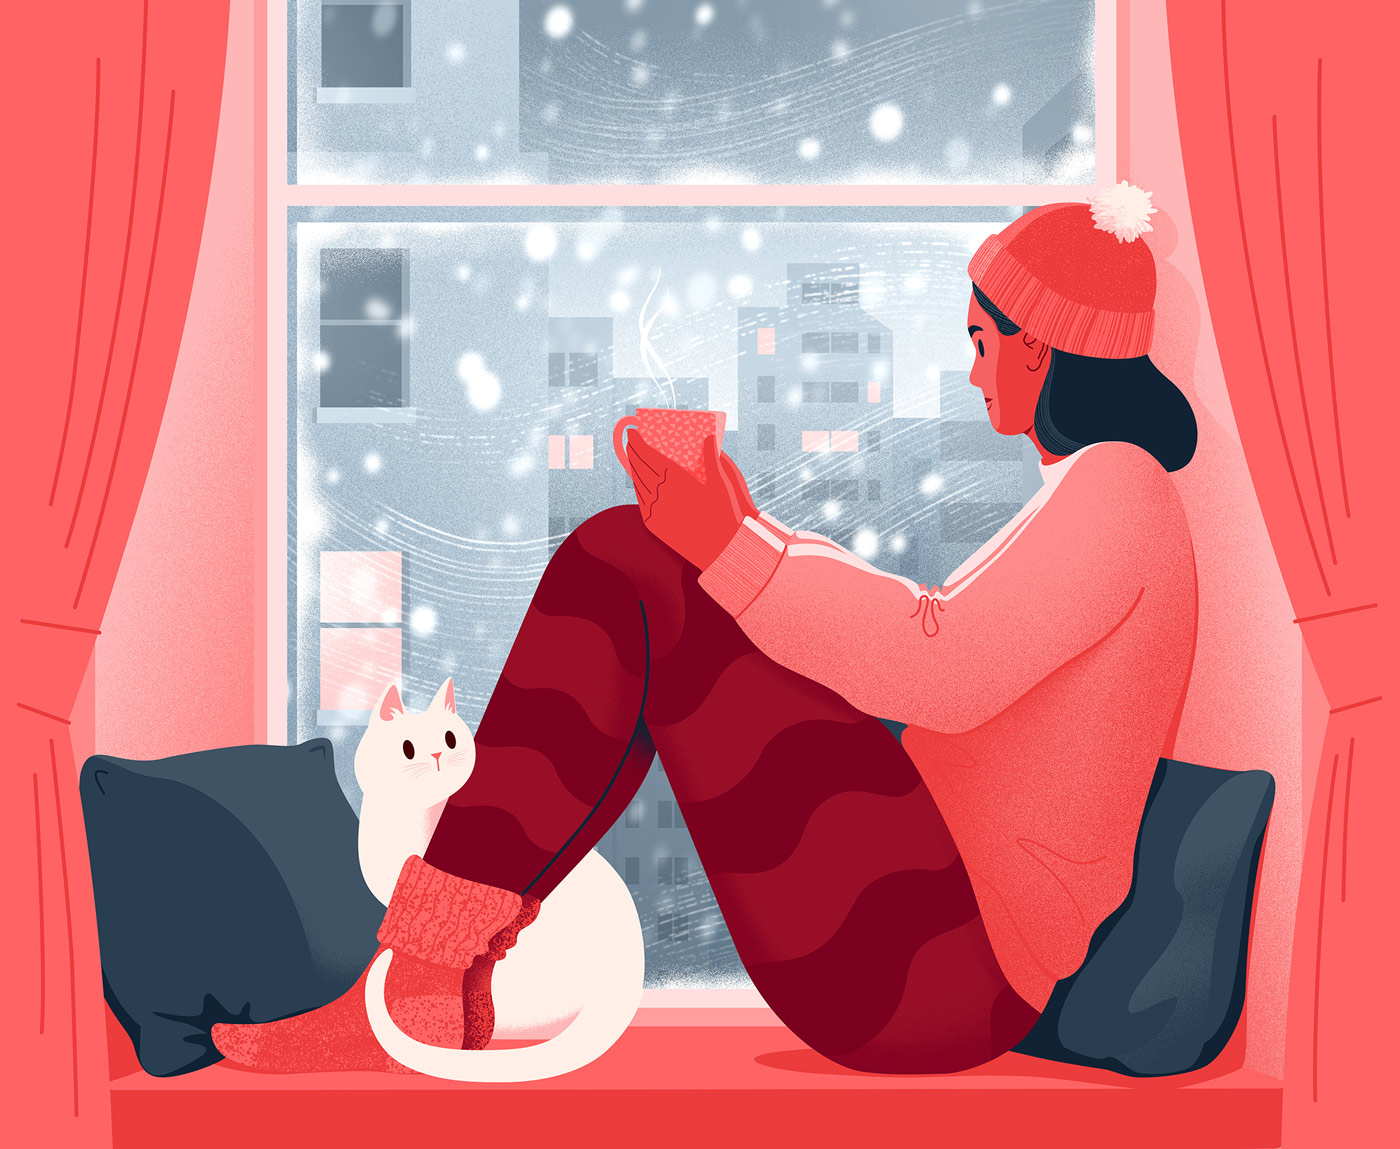 'Stay Cosy' illustration for BBC Science Focus